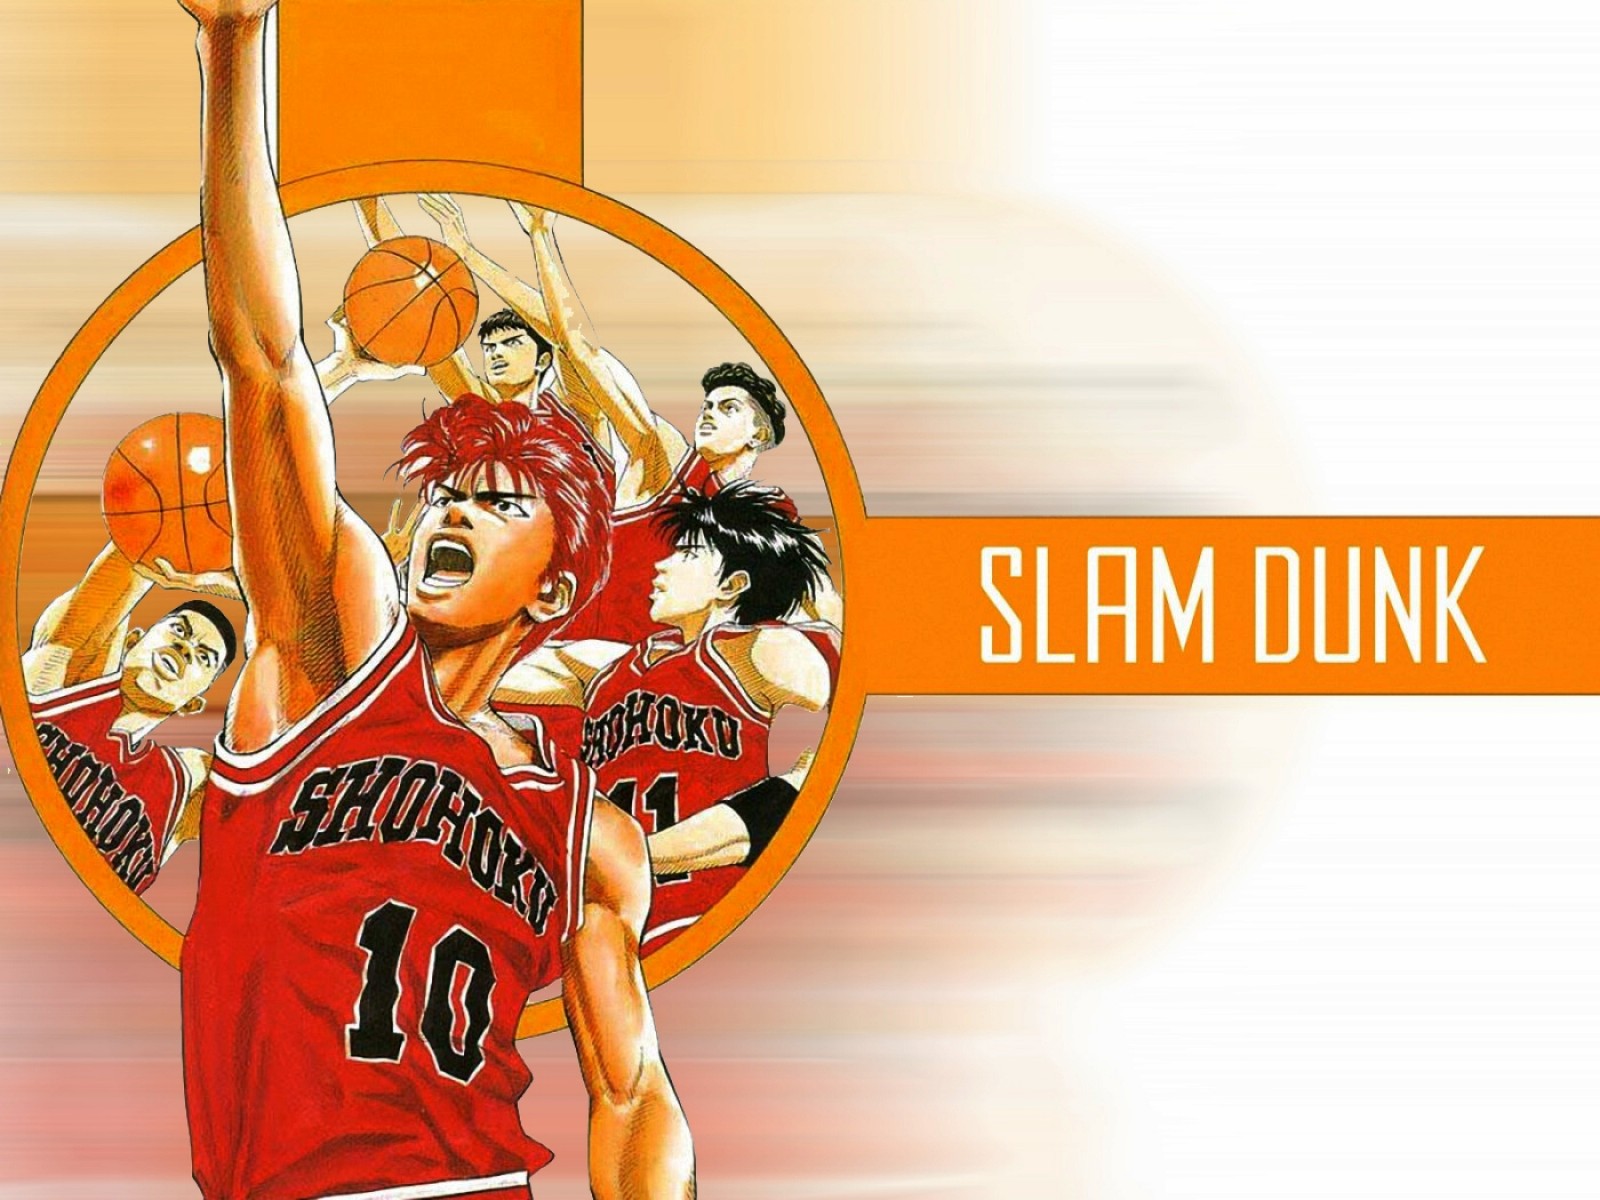 Free Download Slam Dunk Anime Hd Wallpaper Animation Wallpapers 1600x10 For Your Desktop Mobile Tablet Explore 75 Slam Dunk Anime Wallpaper Michael Jordan Wallpaper Slam Dunk Lebron James Slam Dunk Wallpaper